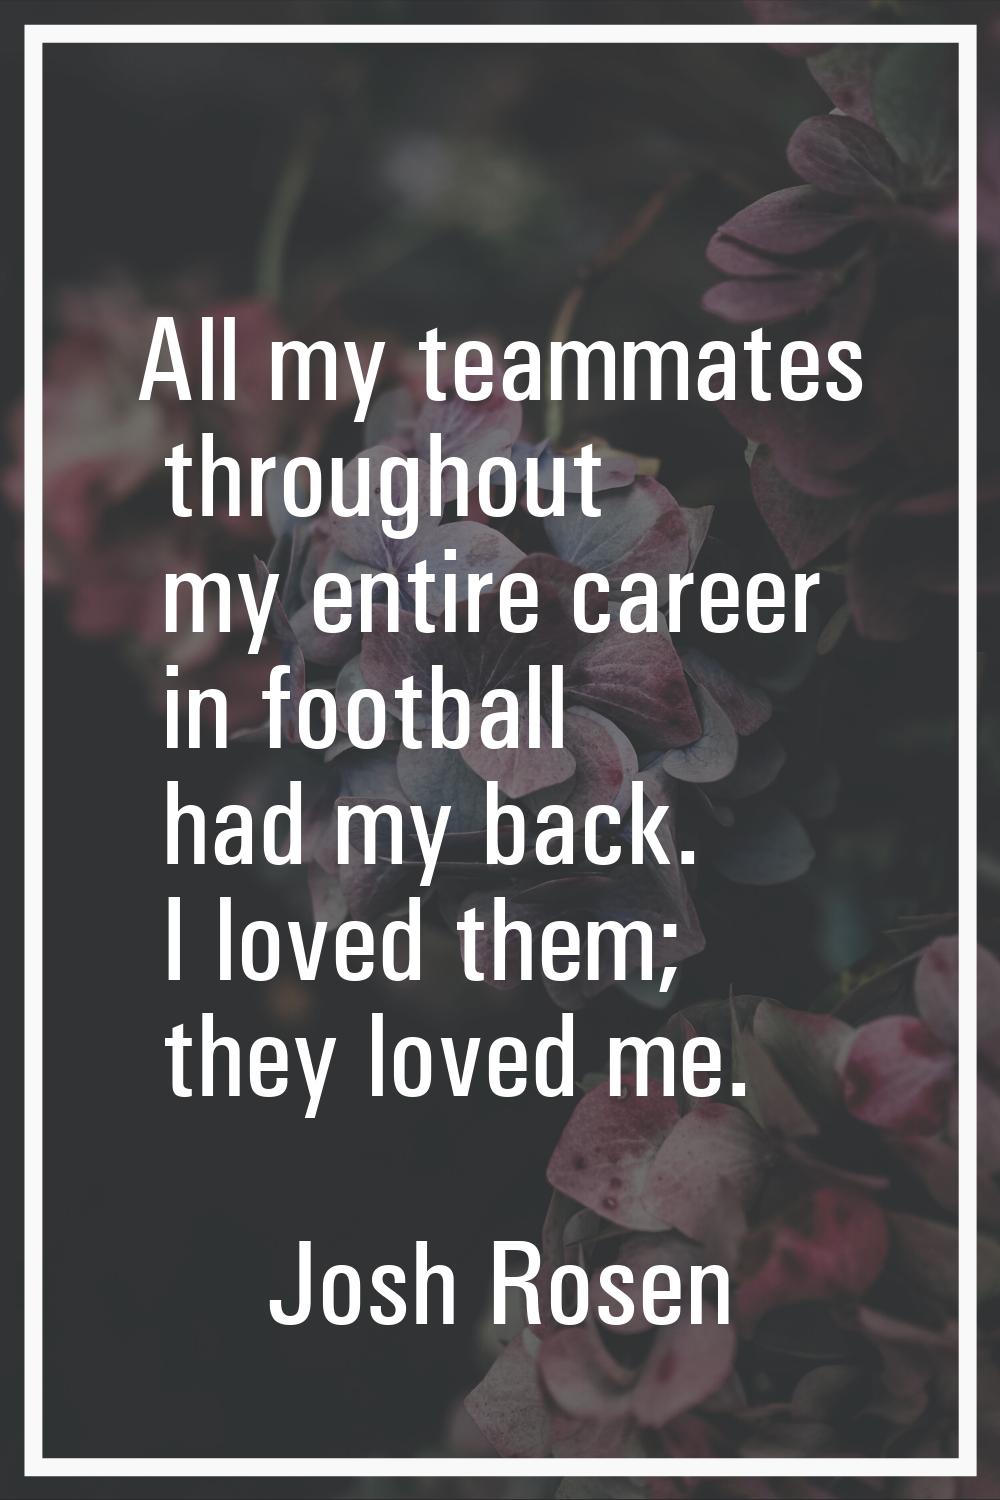 All my teammates throughout my entire career in football had my back. I loved them; they loved me.